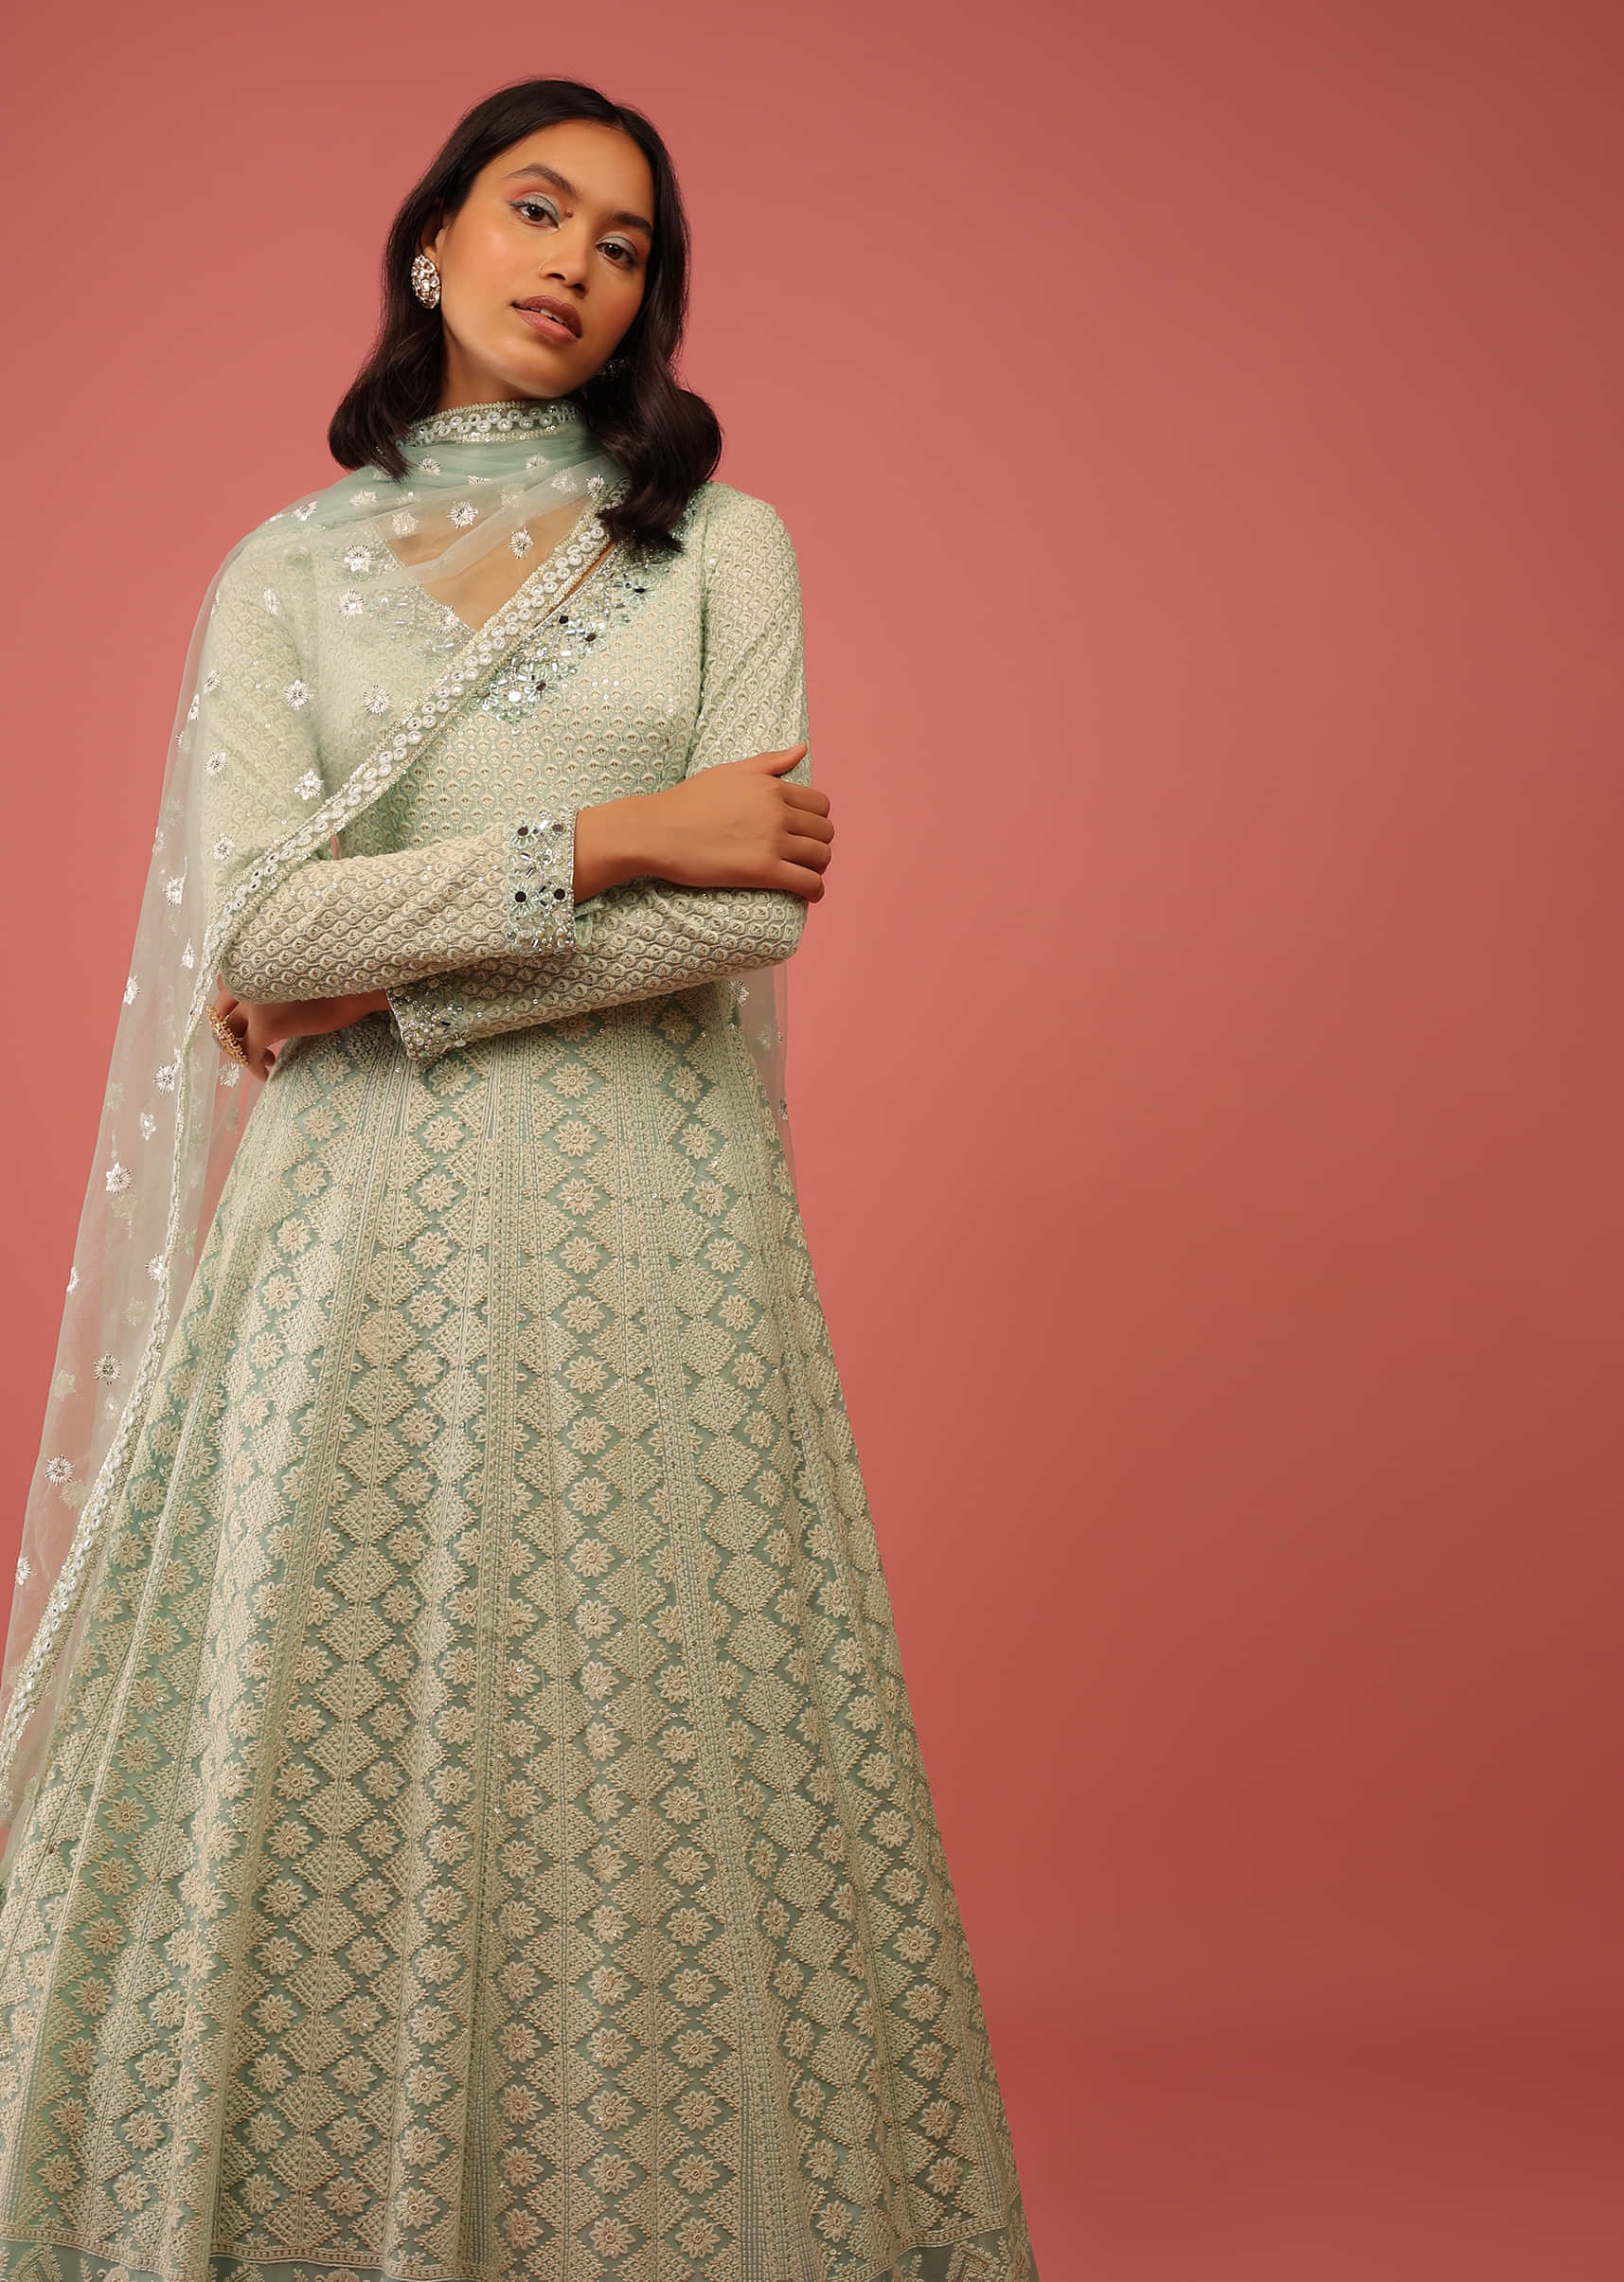 Powder Green Anarkali Suit In Georgette With Lucknowi Thread Embroidered Kalis And Mughal Border